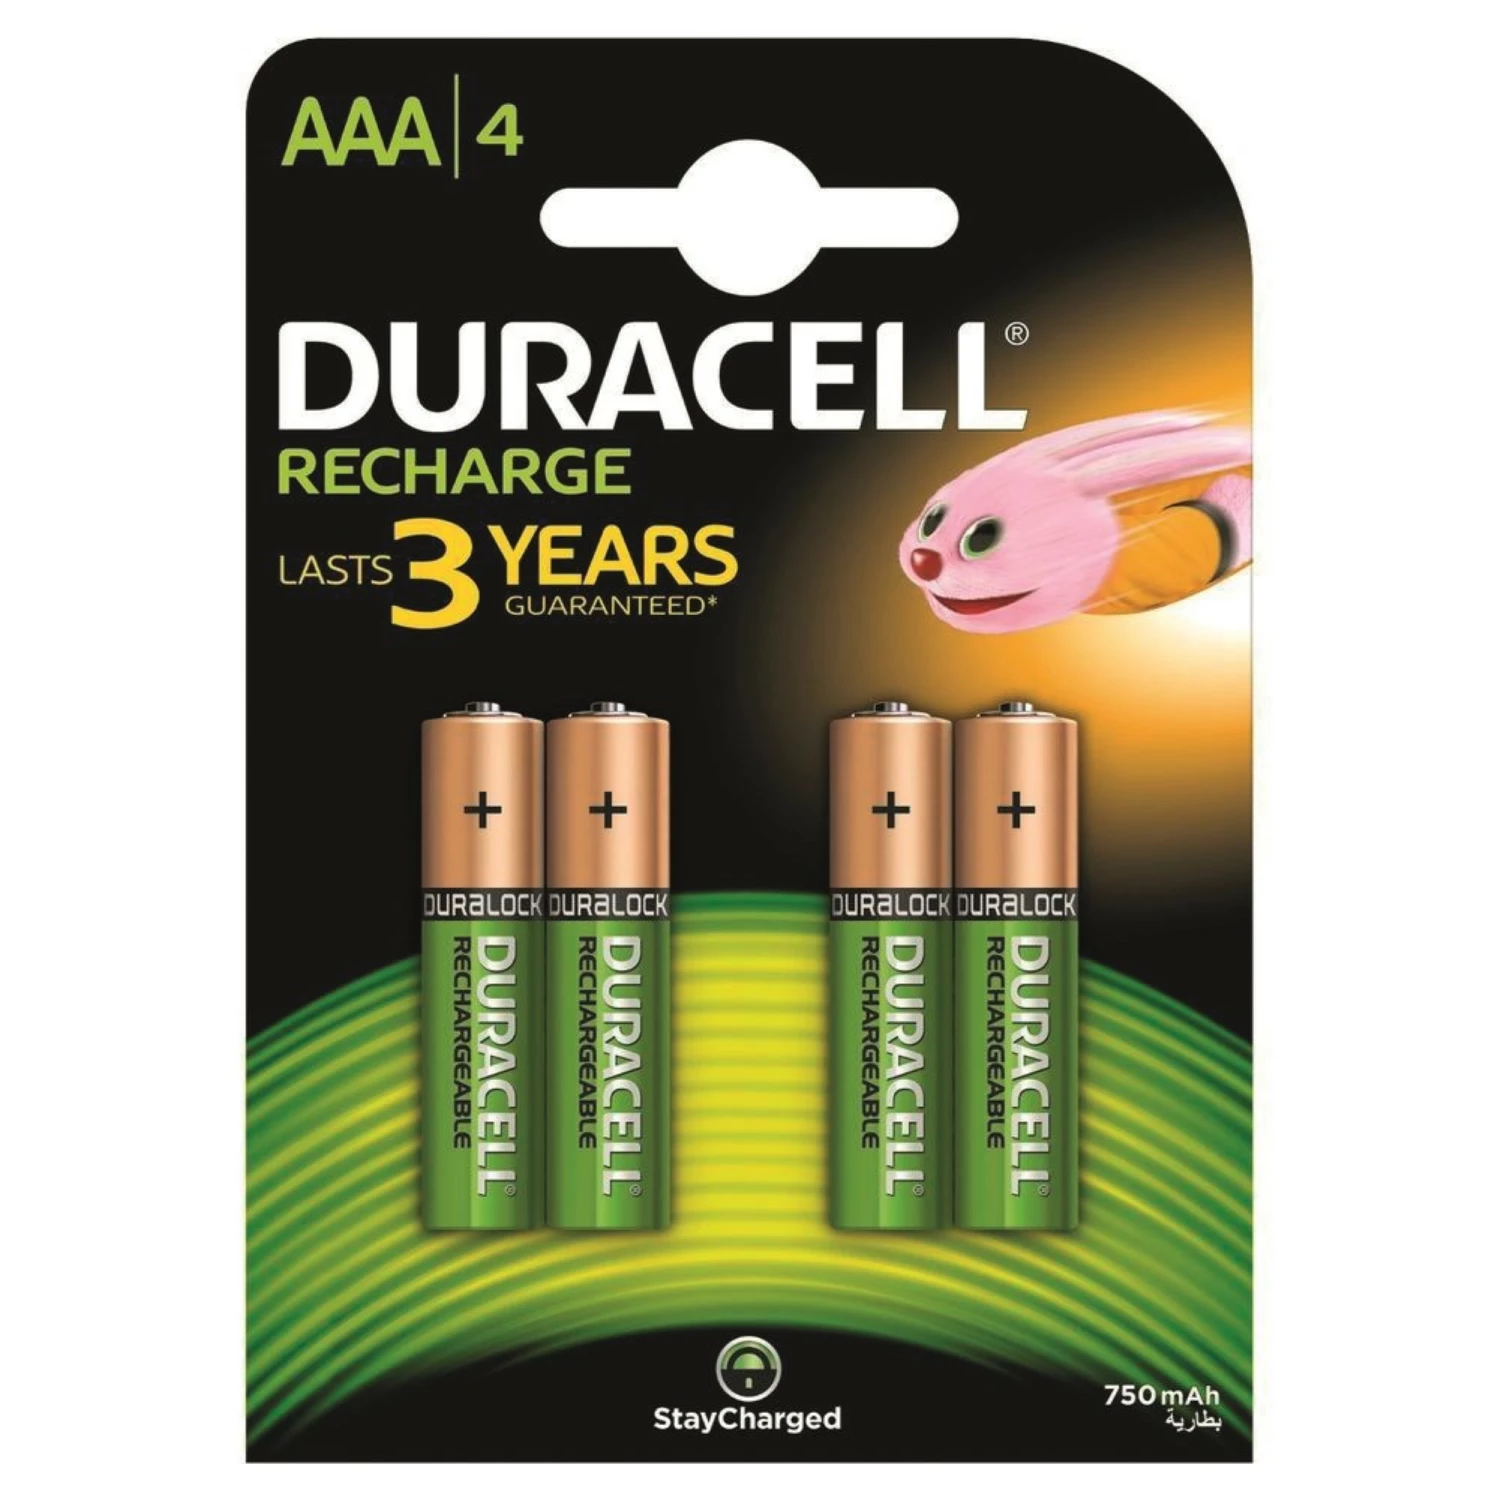 Duracell 3100000233 pile rechargeable plus AAA 750mAh 4pcs.-image